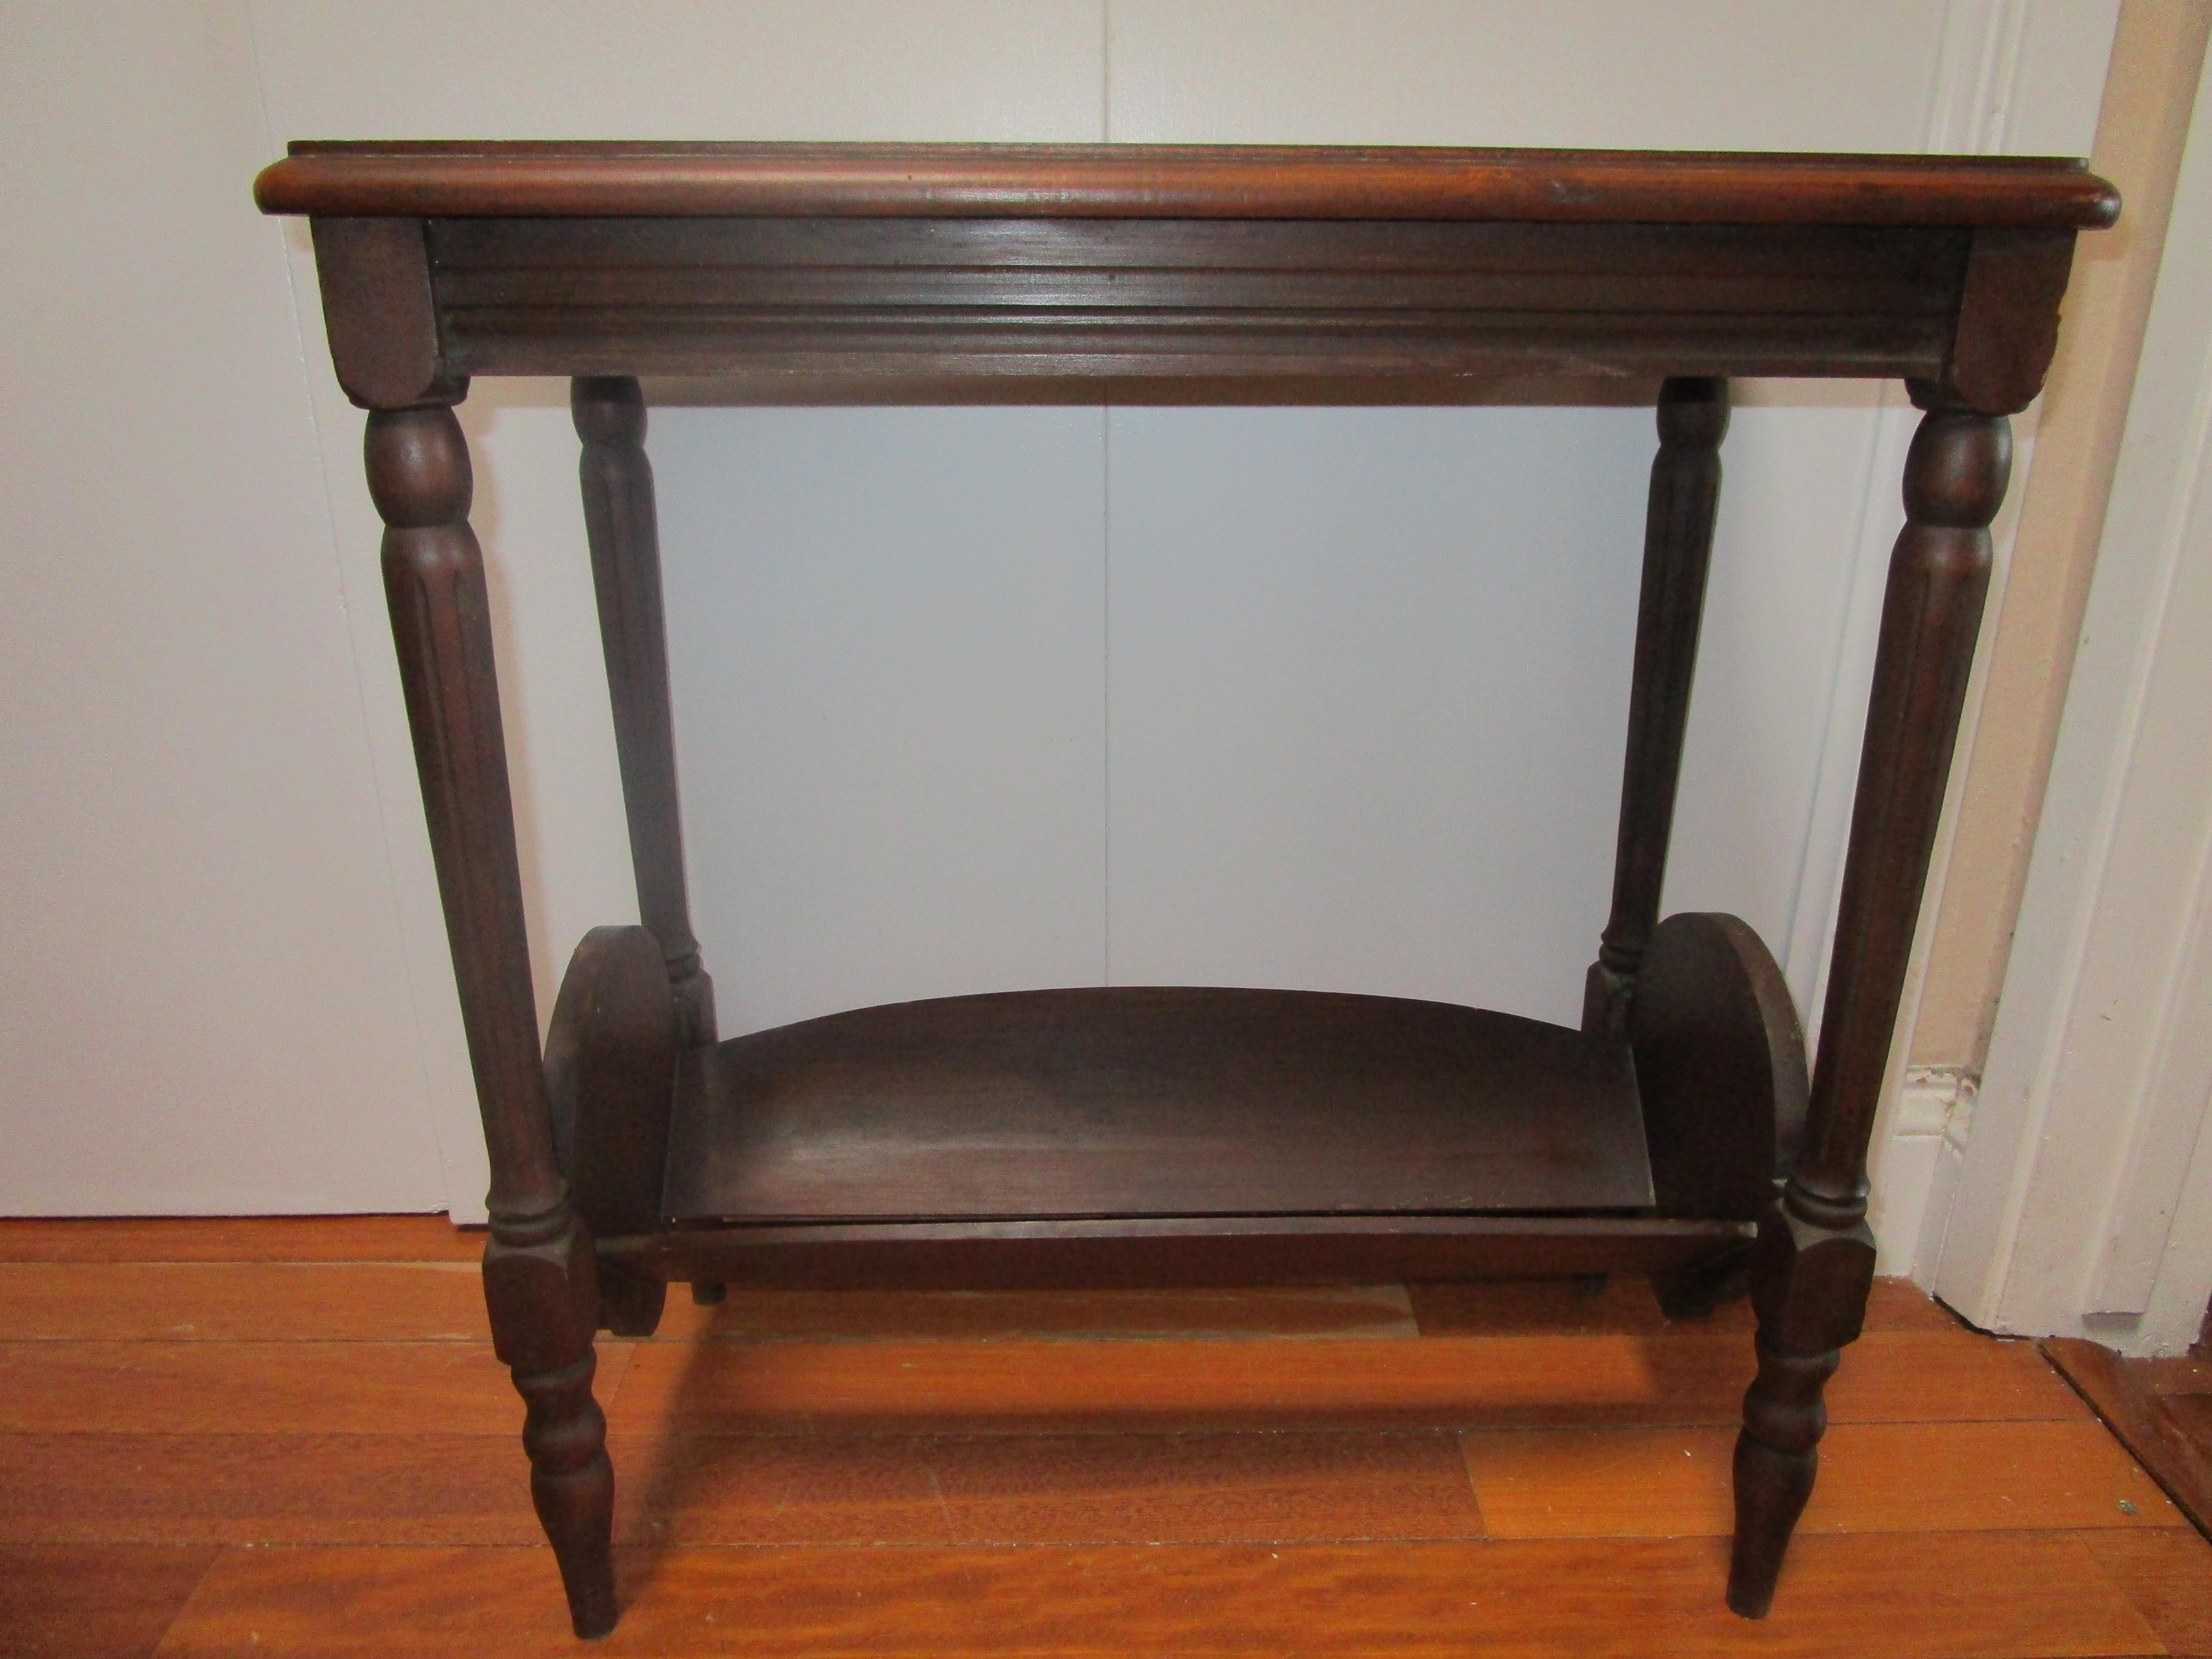 This is the most charming table, from the lower shelf for books, to the veneered wood and the serpentine details. This is an example of American furniture in its unusual forms that arose out of necessity, then faded for one reason or another. 
This